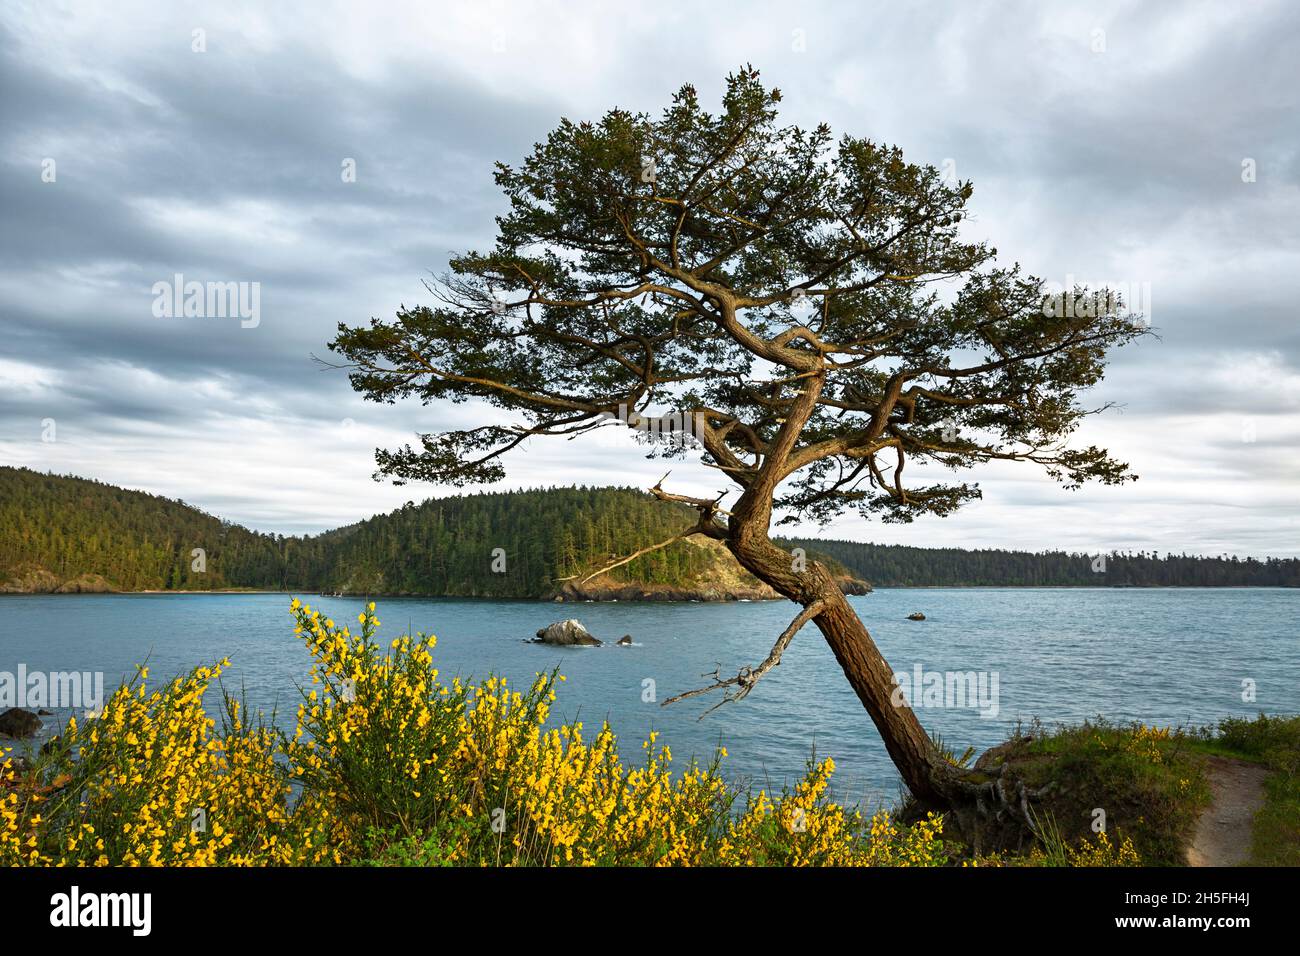 WA19740-00...WASHINGTON - A wind sculptured tree surrounded by scotch broom overlooking Bowman Bay in Deception Pass State Park. Stock Photo